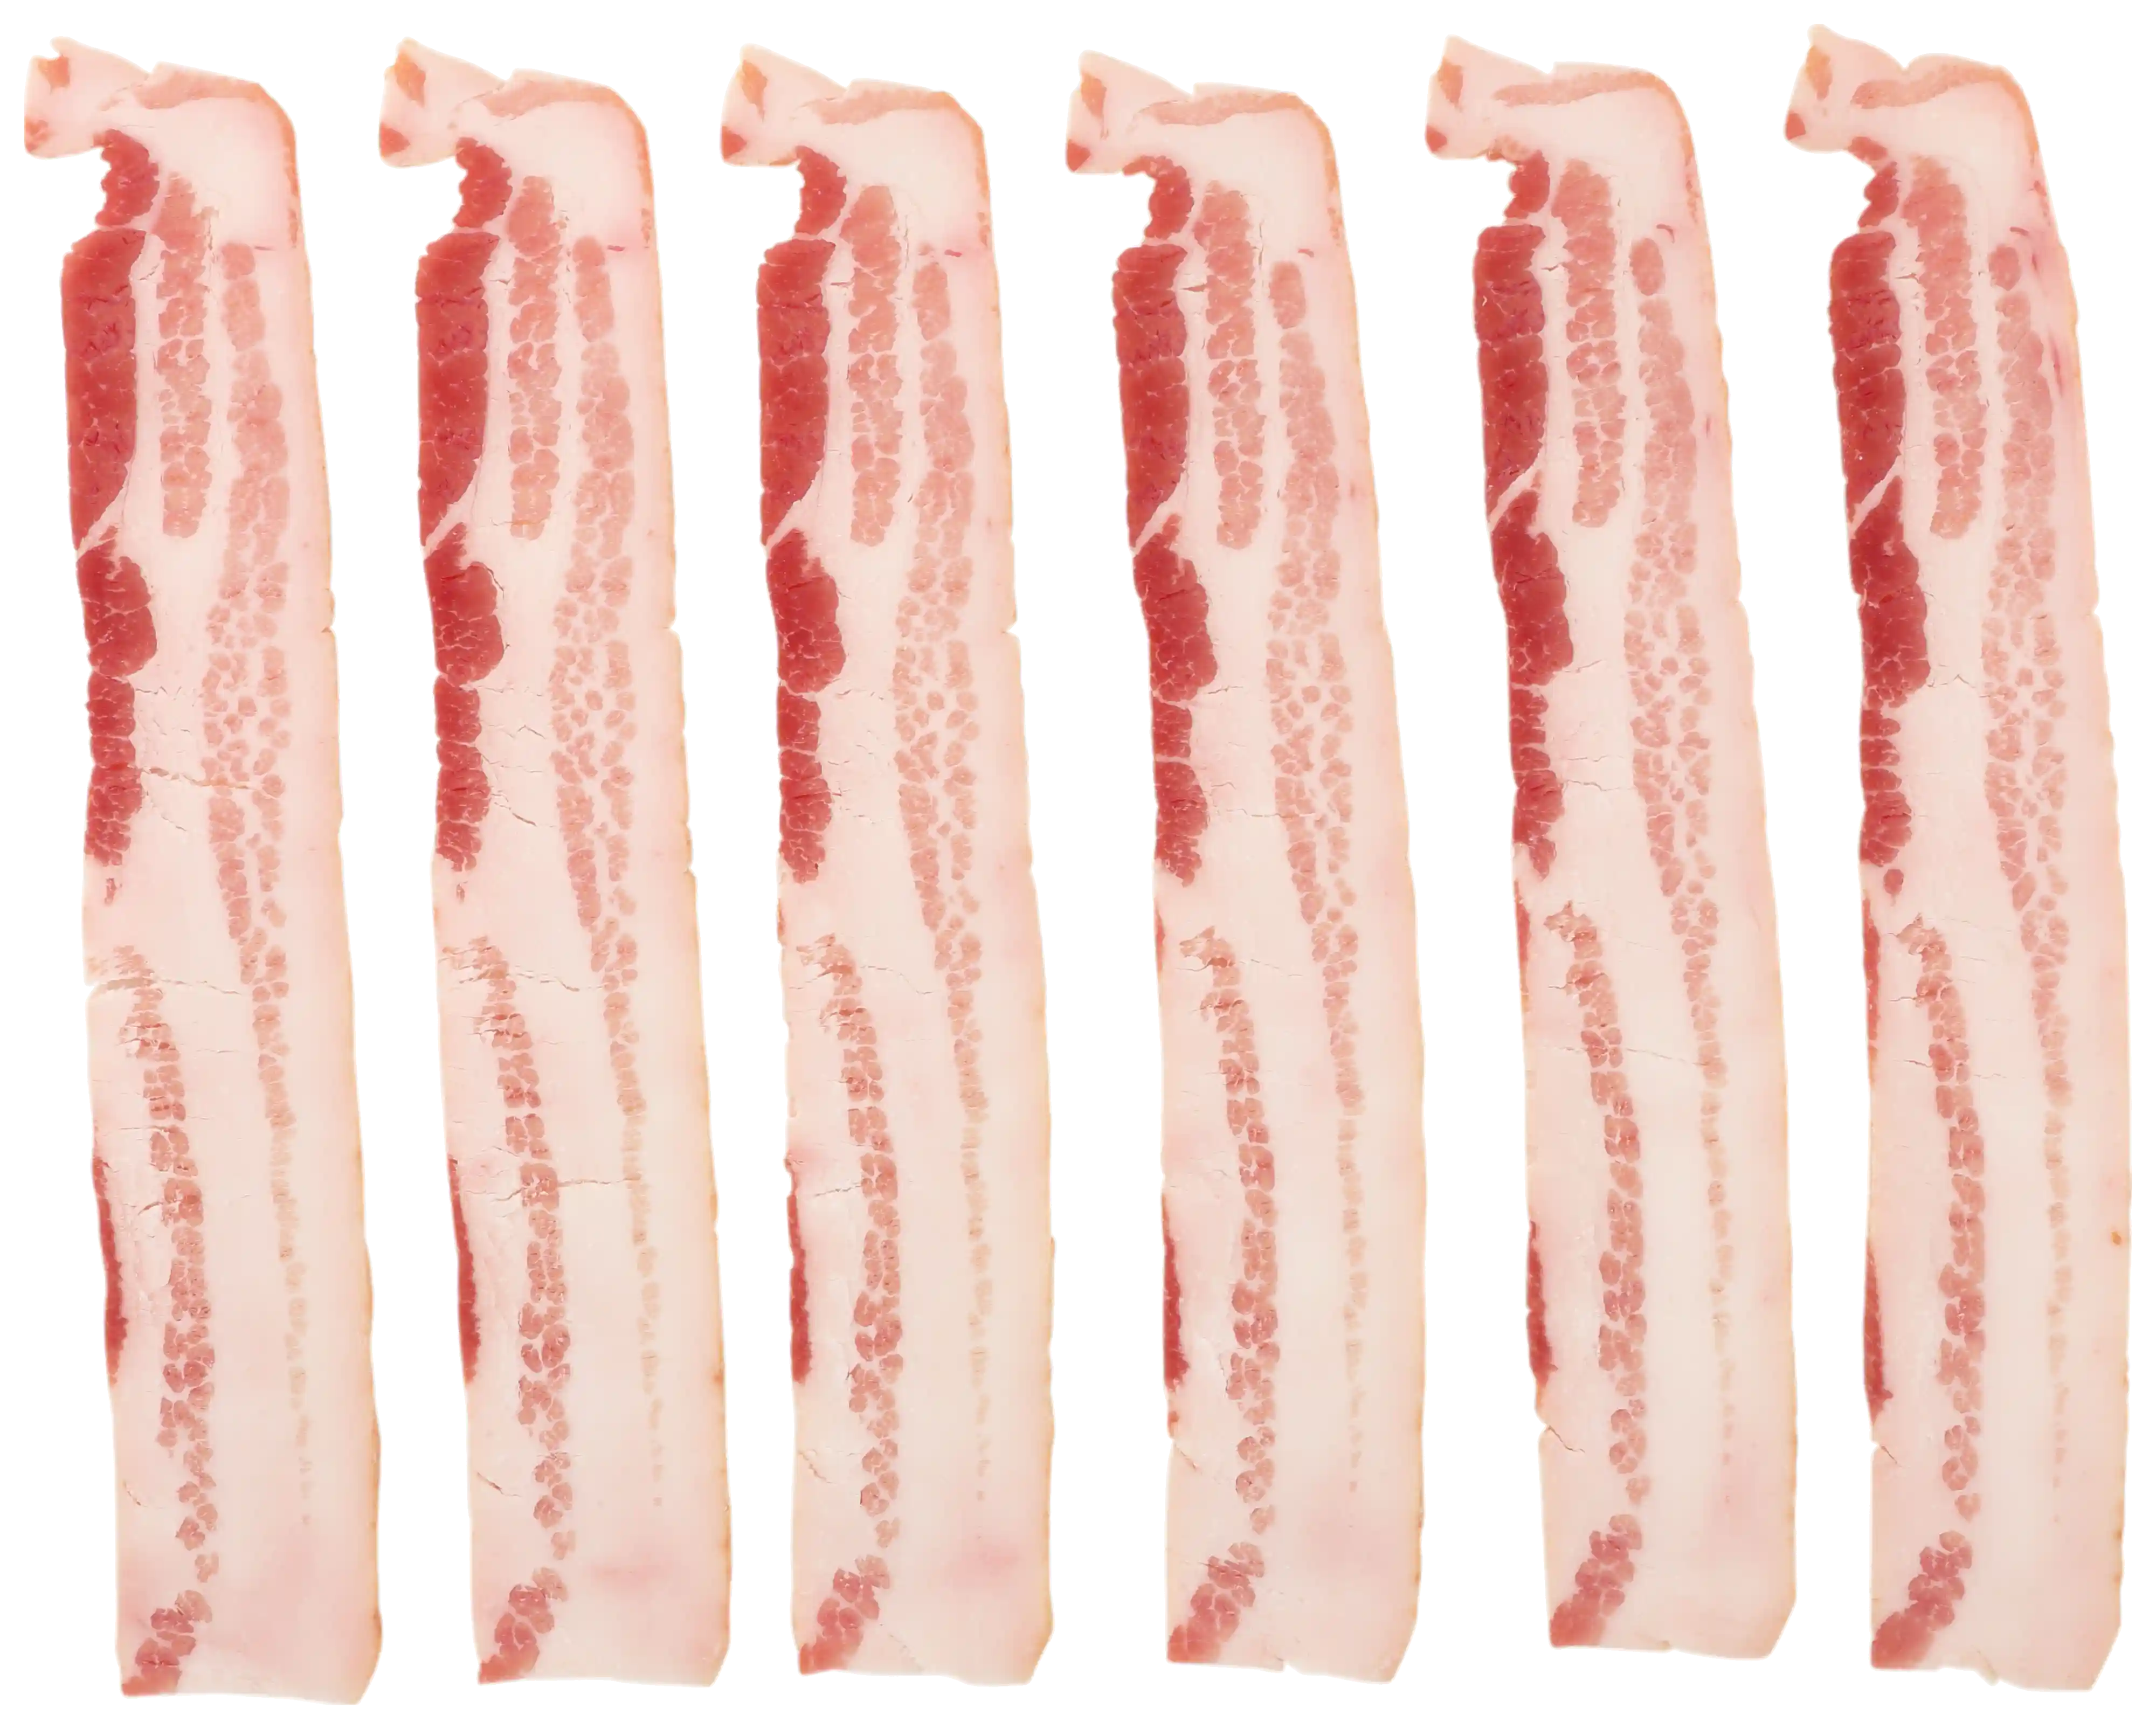 Wright® Brand Naturally Hickory Smoked Extra Thick Sliced Bacon, Flat-Pack®, 15 Lbs, 8-10 Slices per Pound, Frozen_image_21